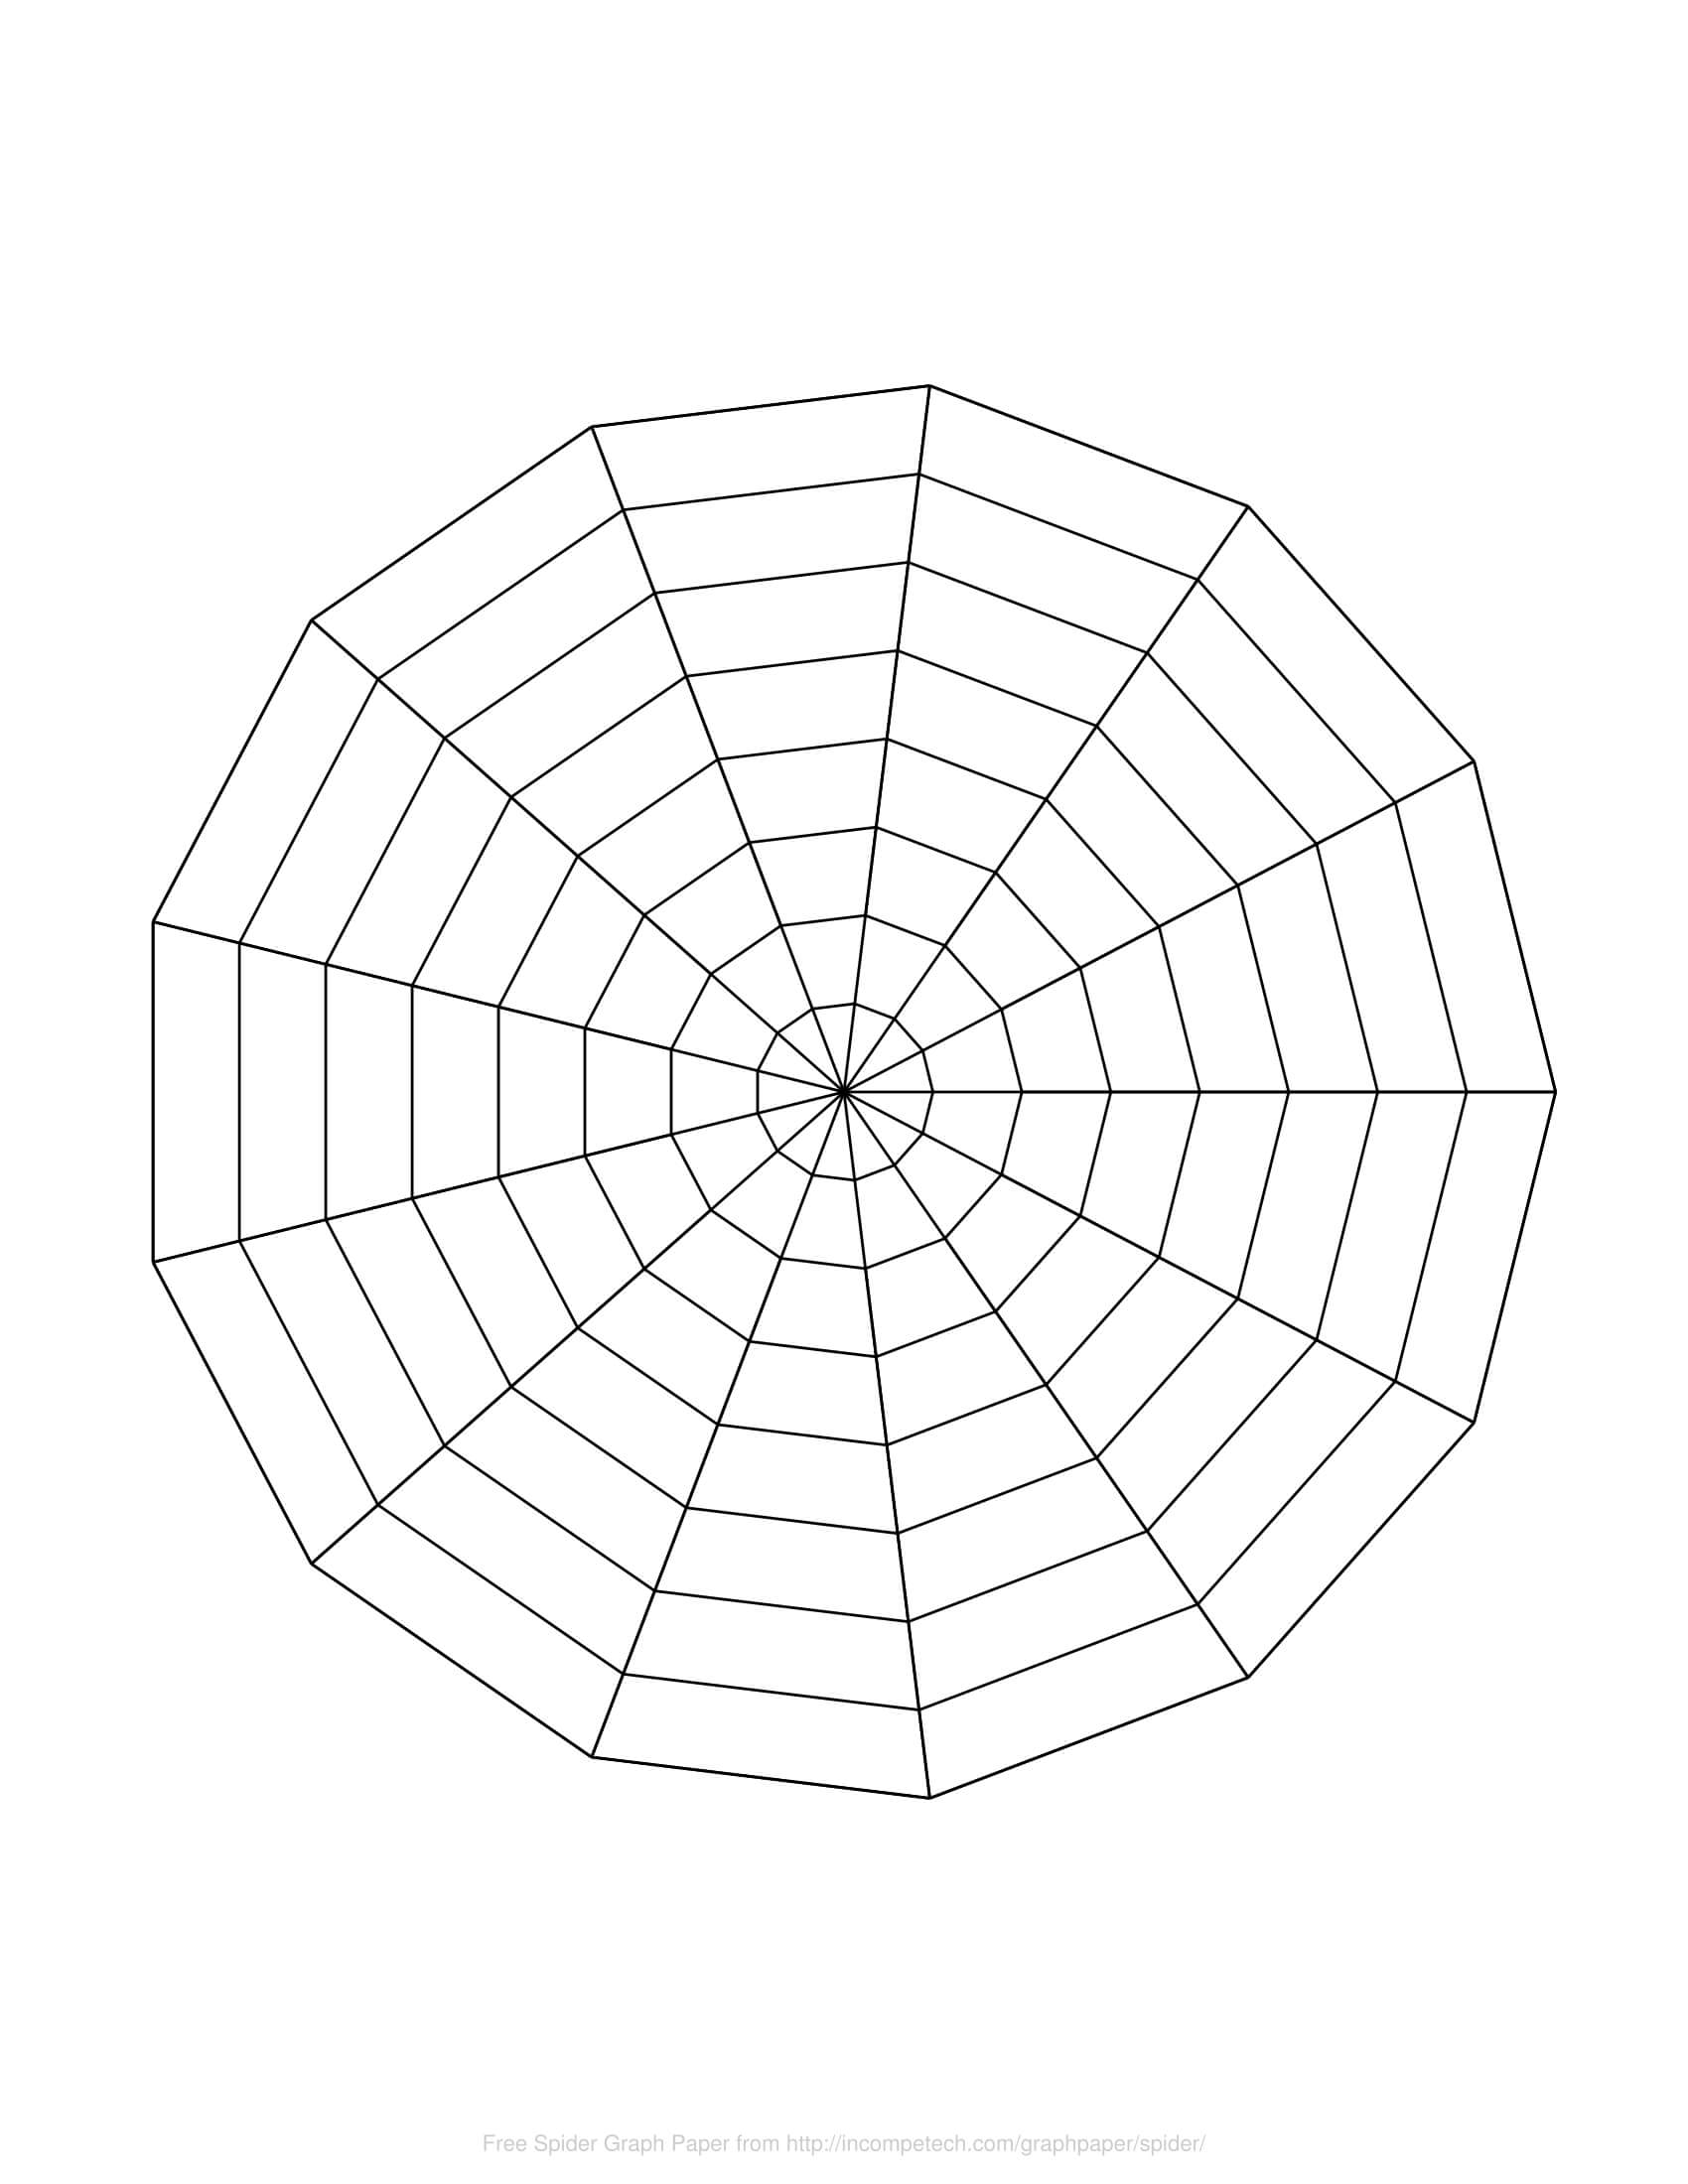 Free Online Graph Paper / Spider Pertaining To Blank Radar Chart Template